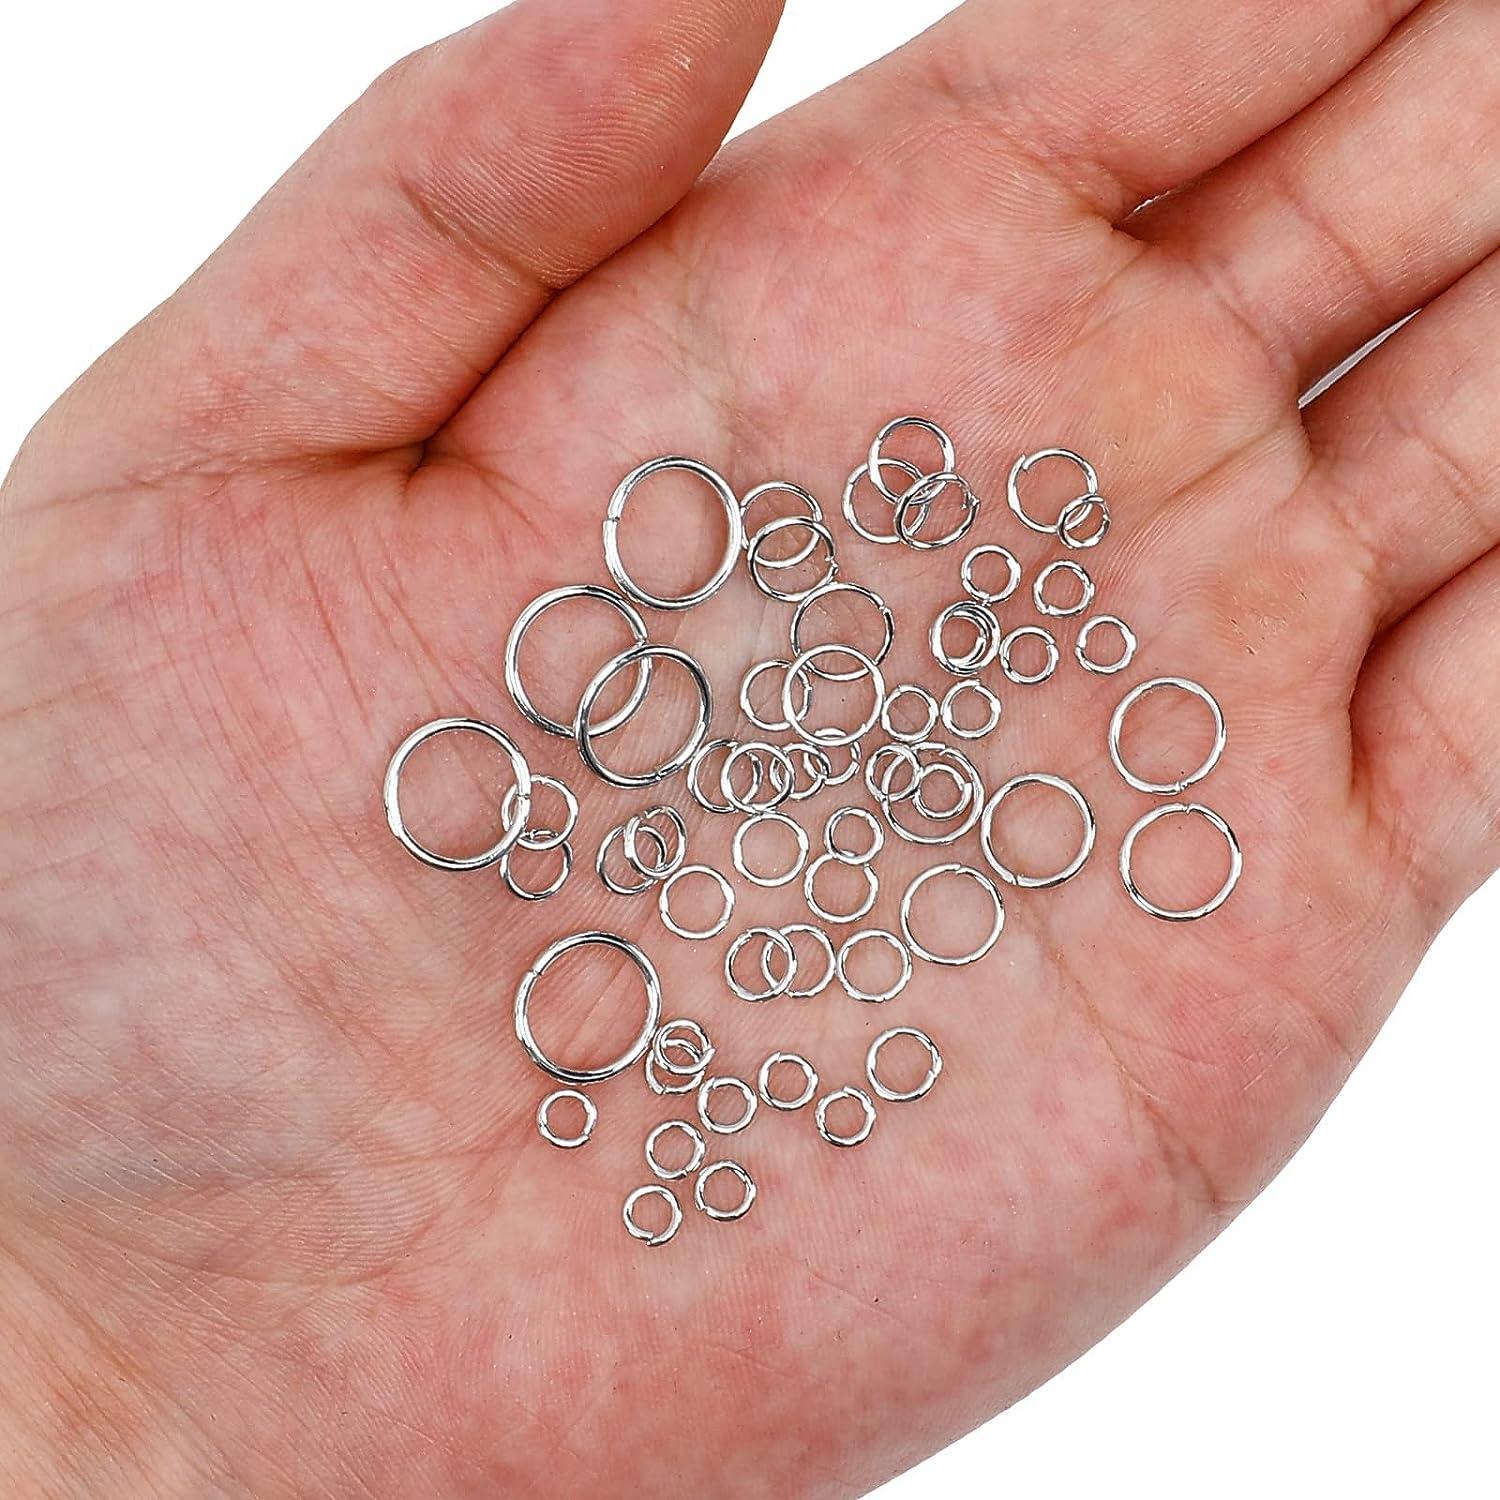 1000Pcs O Ring Connectors Metal Open Jump Rings Set 304 Stainless-Steel  Jump Rings for Jewelry Making Connectors (4mm 5mm 6mm 7mm 8mm 10mm)